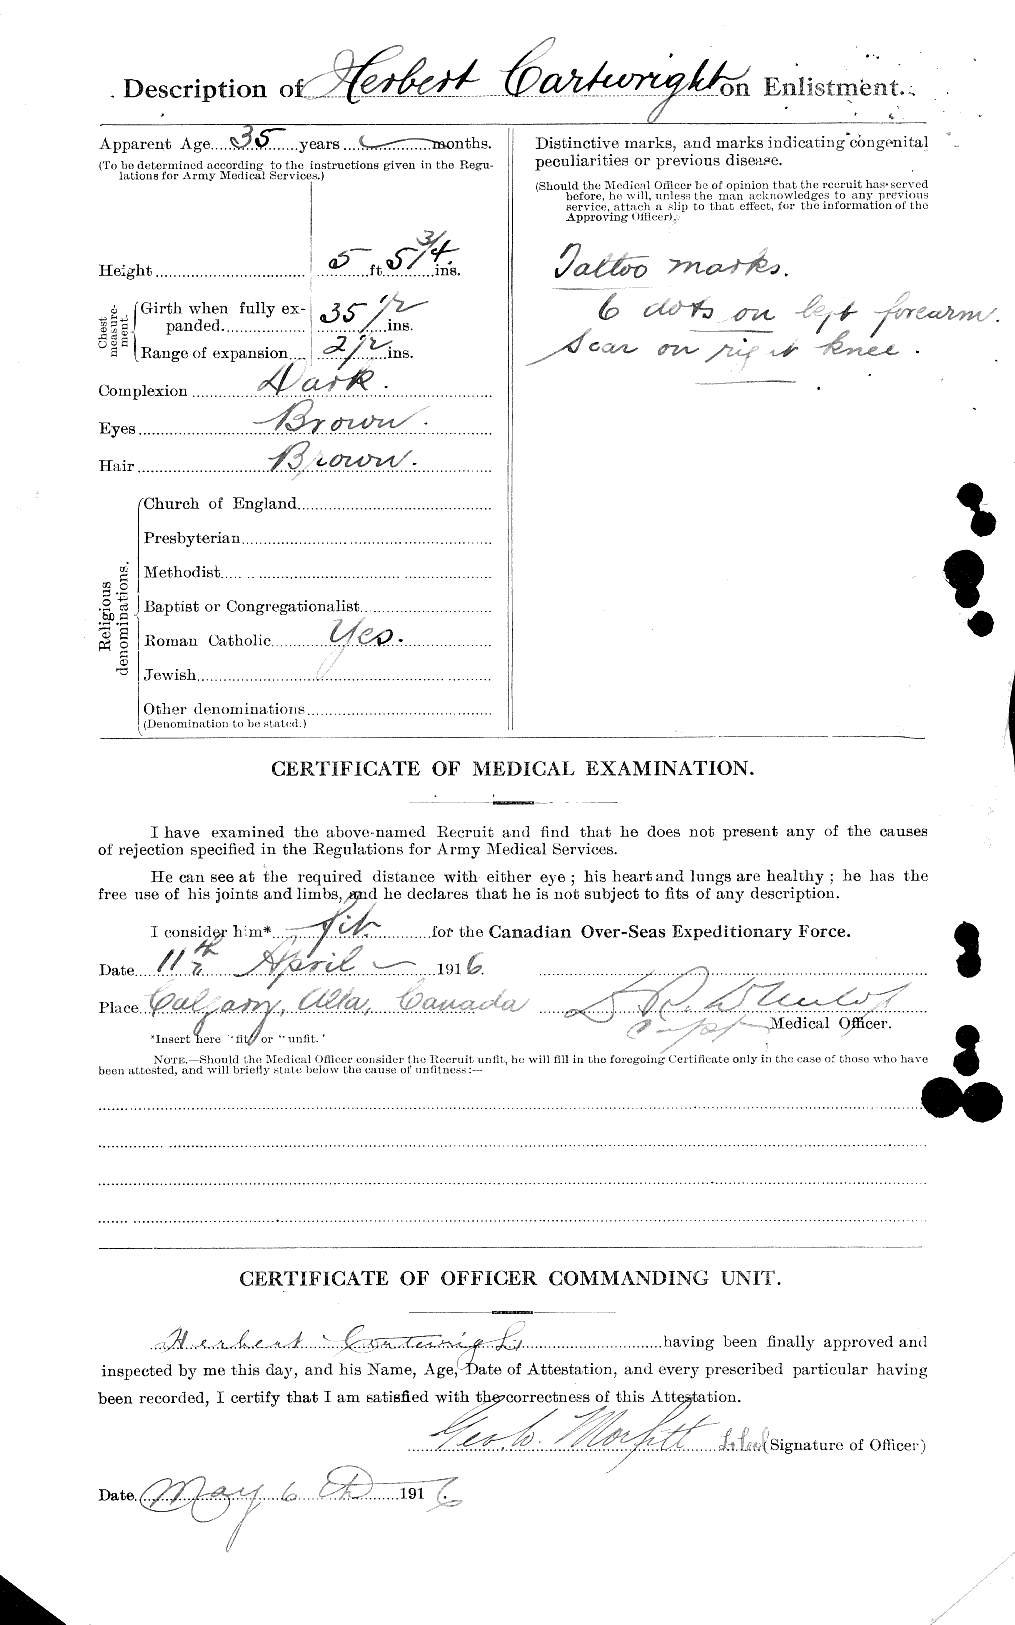 Personnel Records of the First World War - CEF 011589b